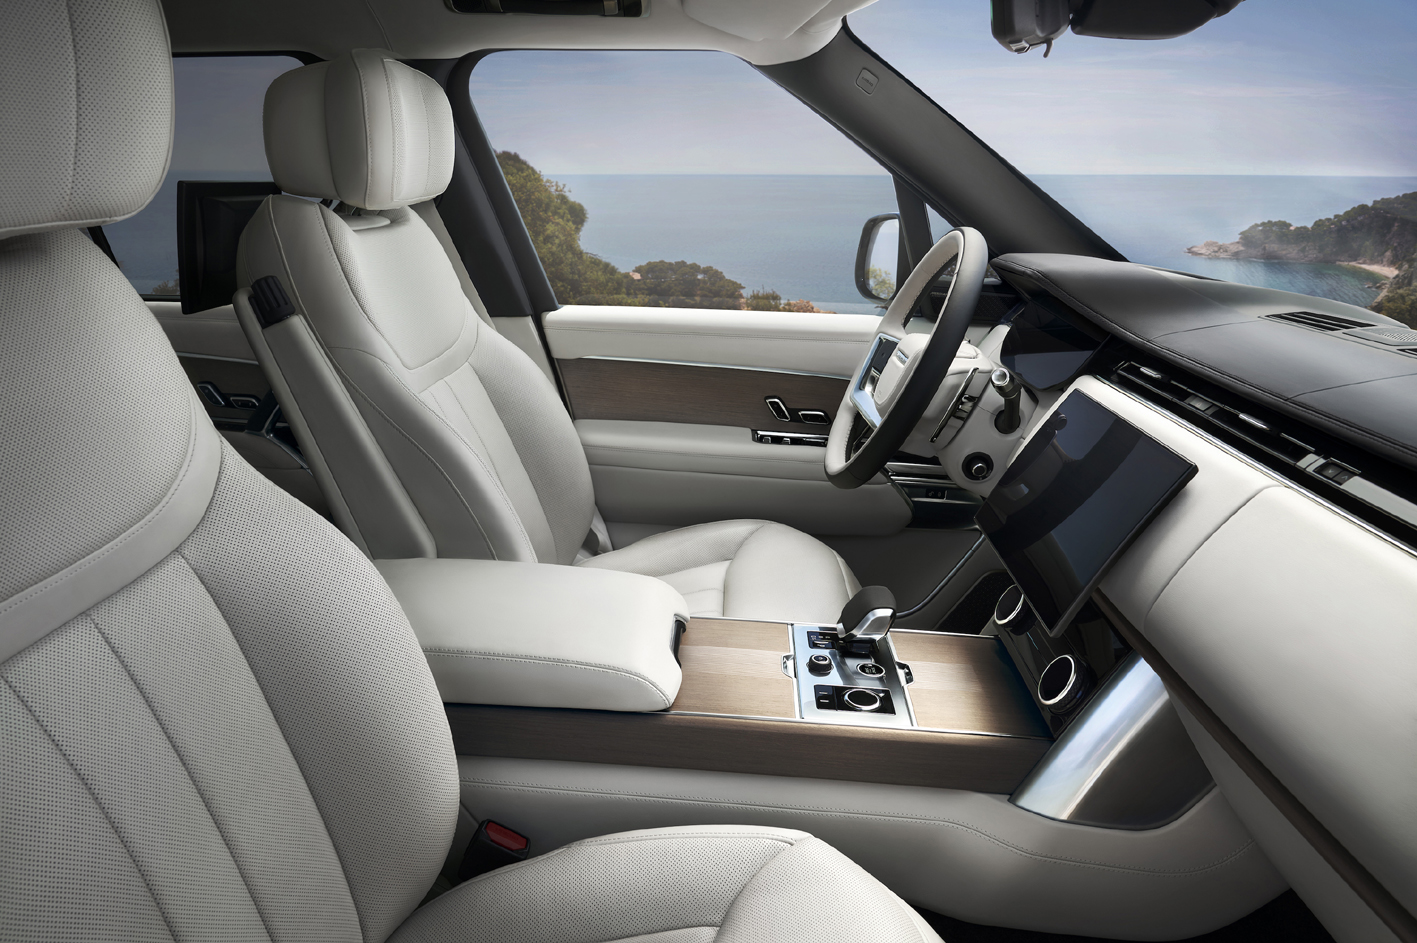 Land Rover is using Ultrafabrics within its new Range Rover and Range Rover SV introductions.  